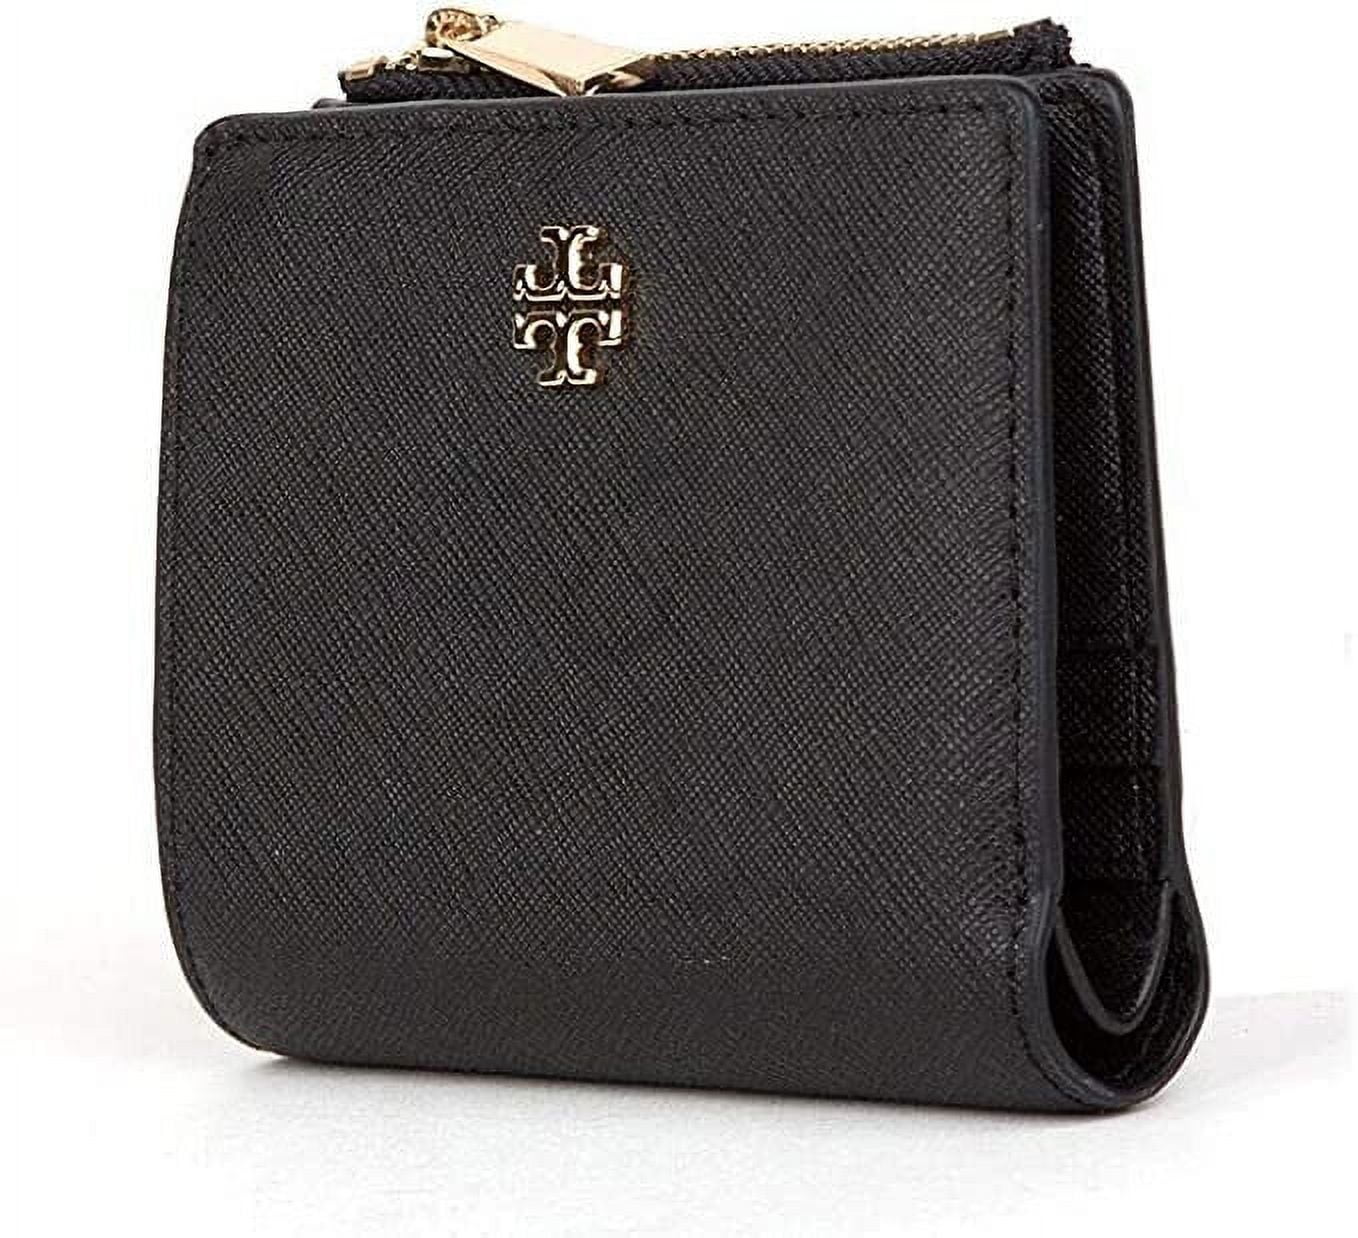 Tory Burch Black Emerson Leather Backpack